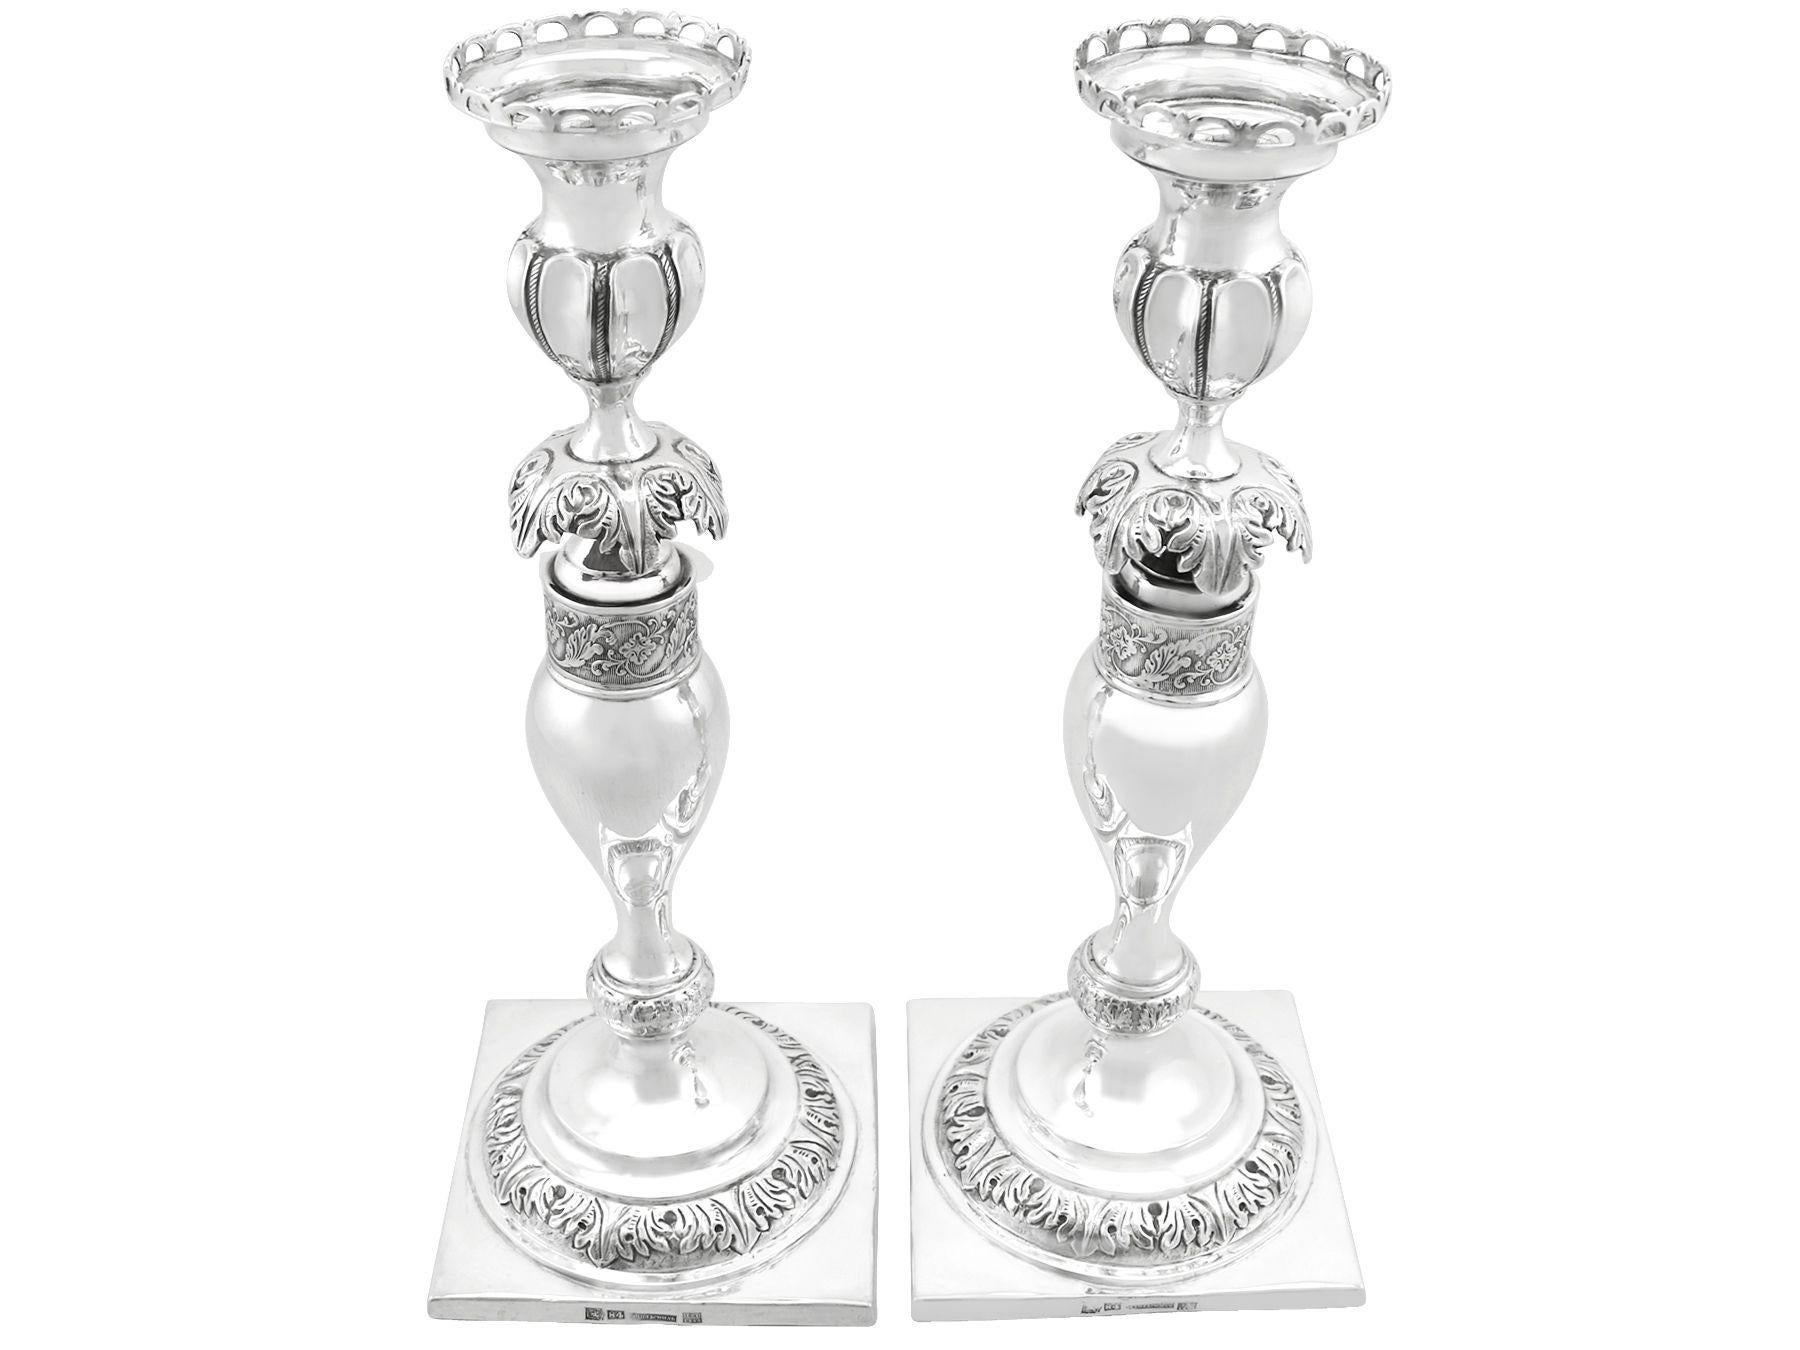 An exceptional, fine and impressive pair of antique Russian silver Shabbat candlesticks; an addition to our ornamental silverware collection

These exceptional antique silver Russian Shabbat/Sabbath* candlesticks have a baluster, circular rounded